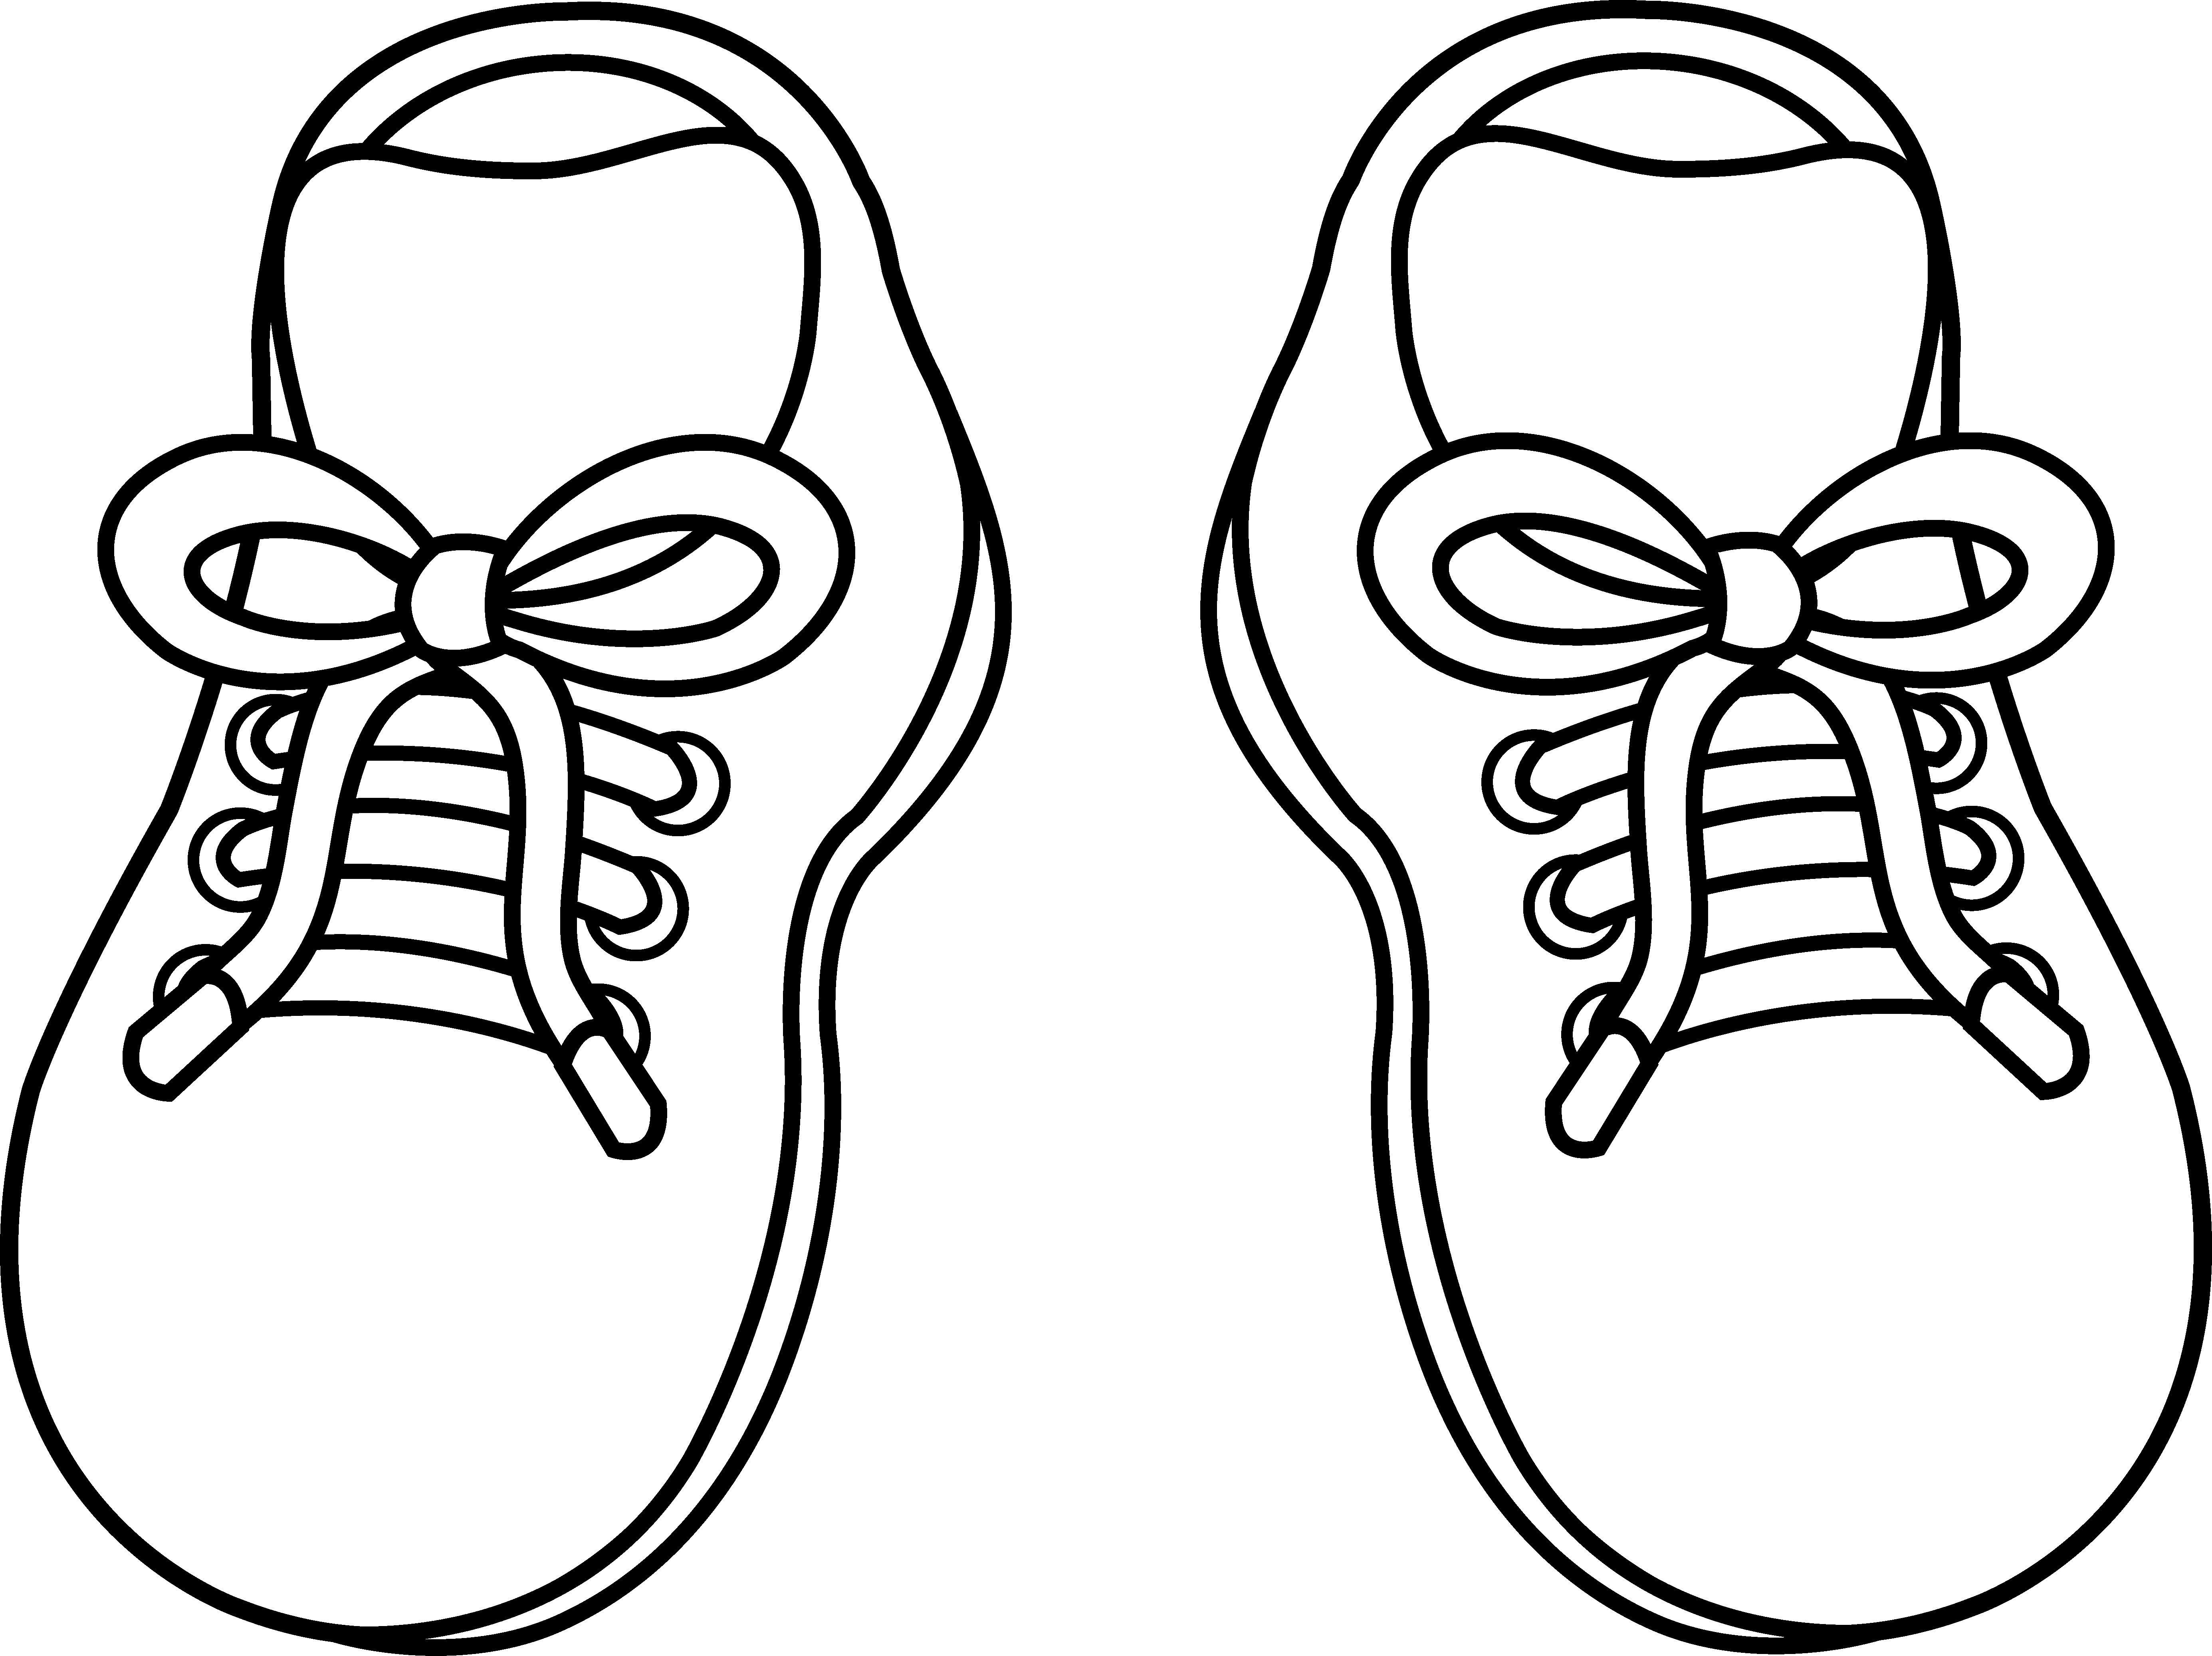 Outline Of A Running Shoe - ClipArt Best